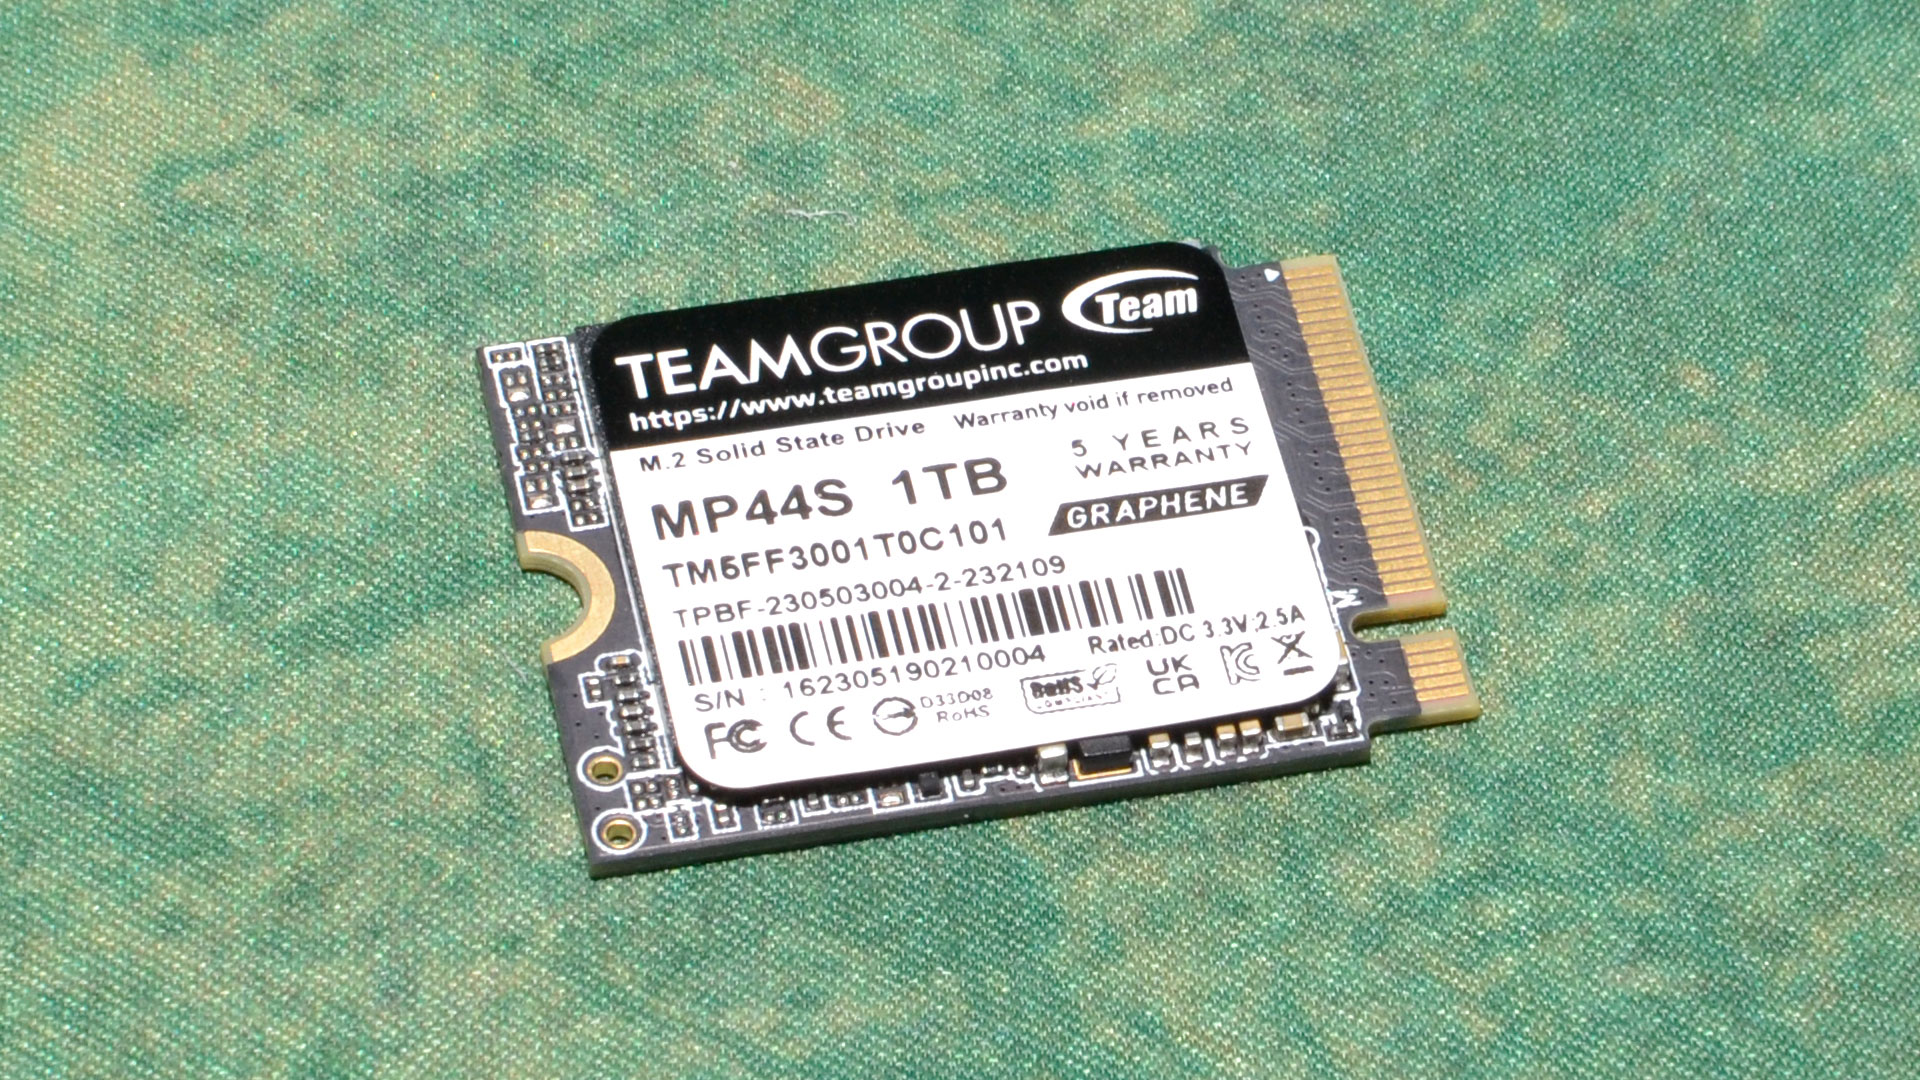 Sabrent Rocket Q4 2230 2TB NVMe SSD Performance Numbers : r/ROGAlly